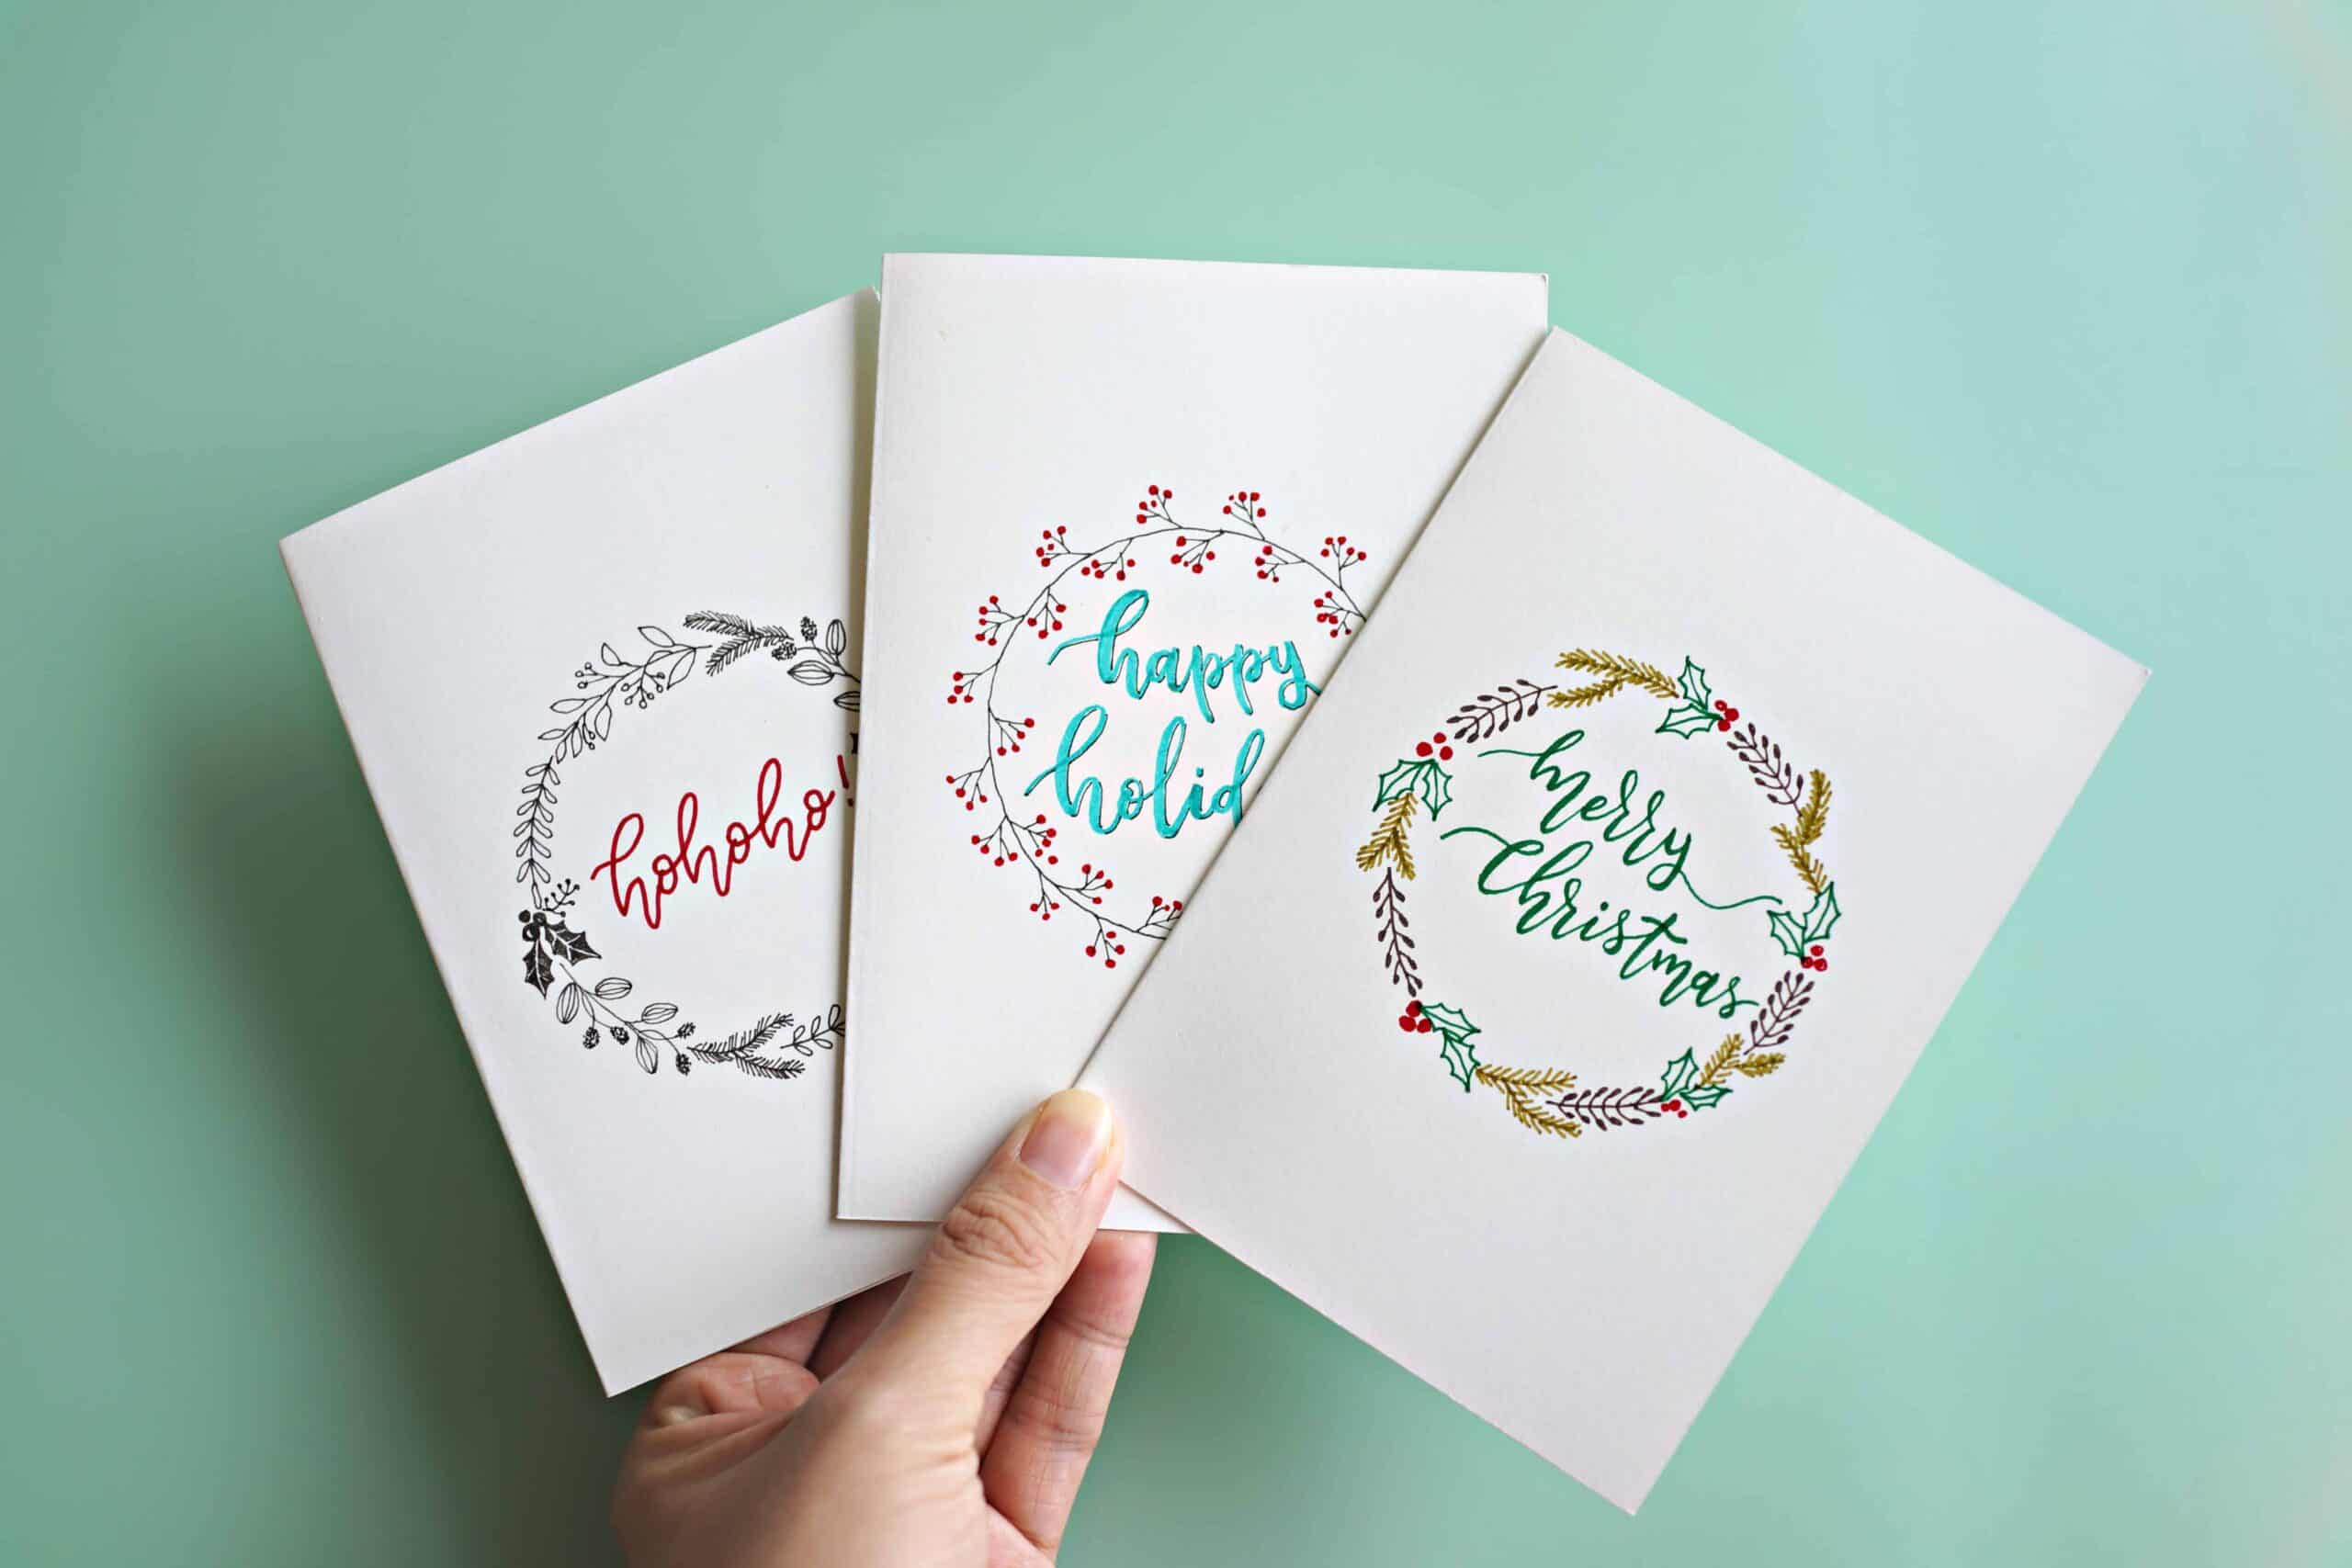 How to Print on Cardstock